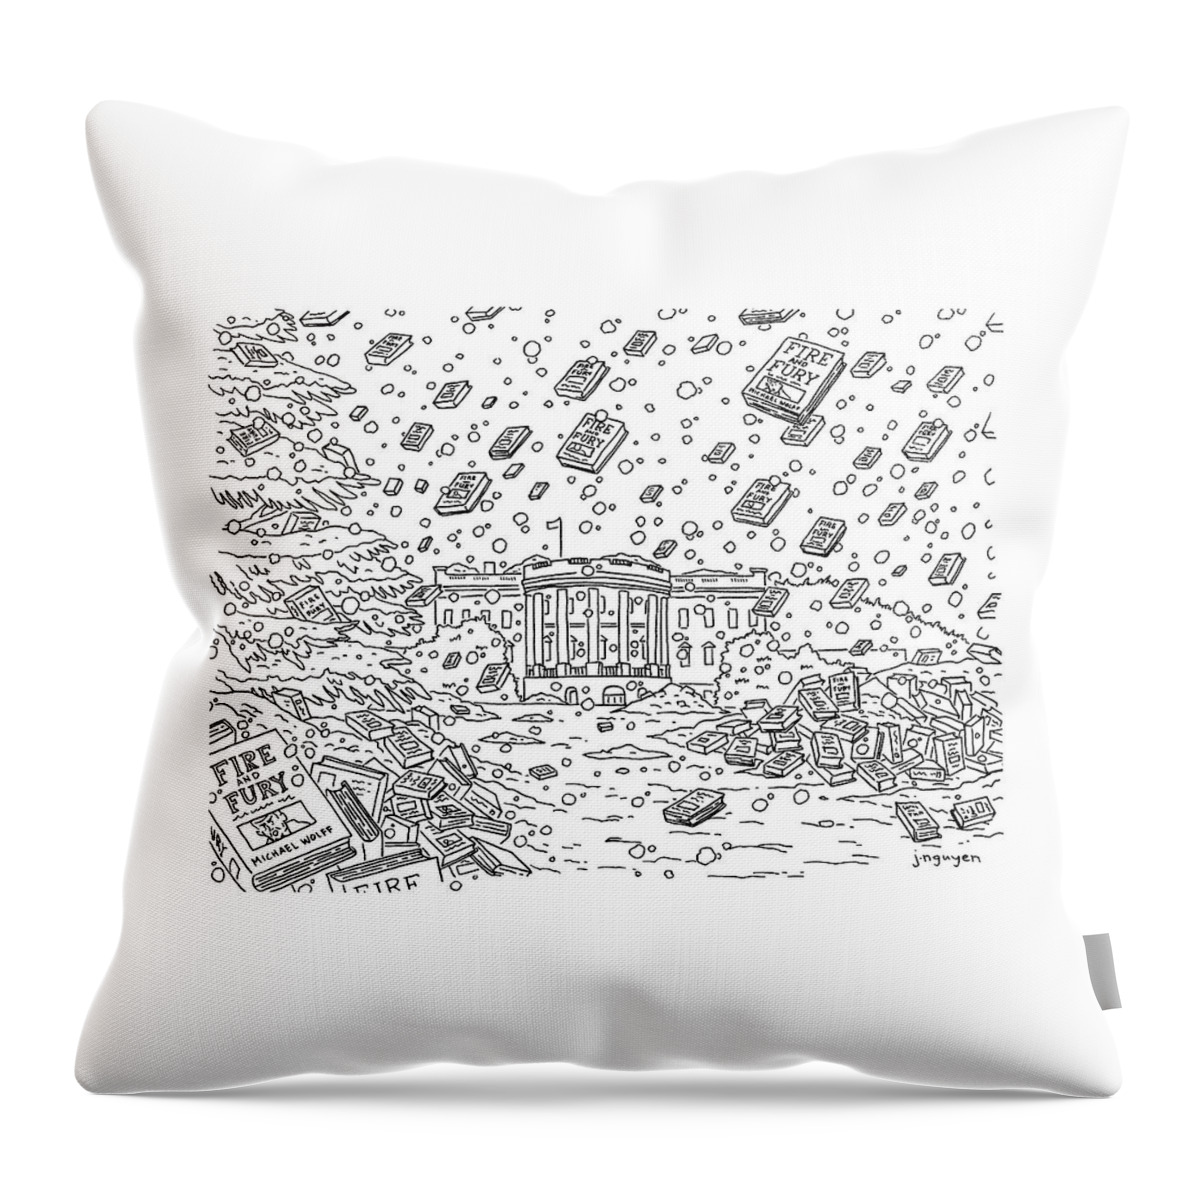 Blizzard Of Fire And Fury Throw Pillow